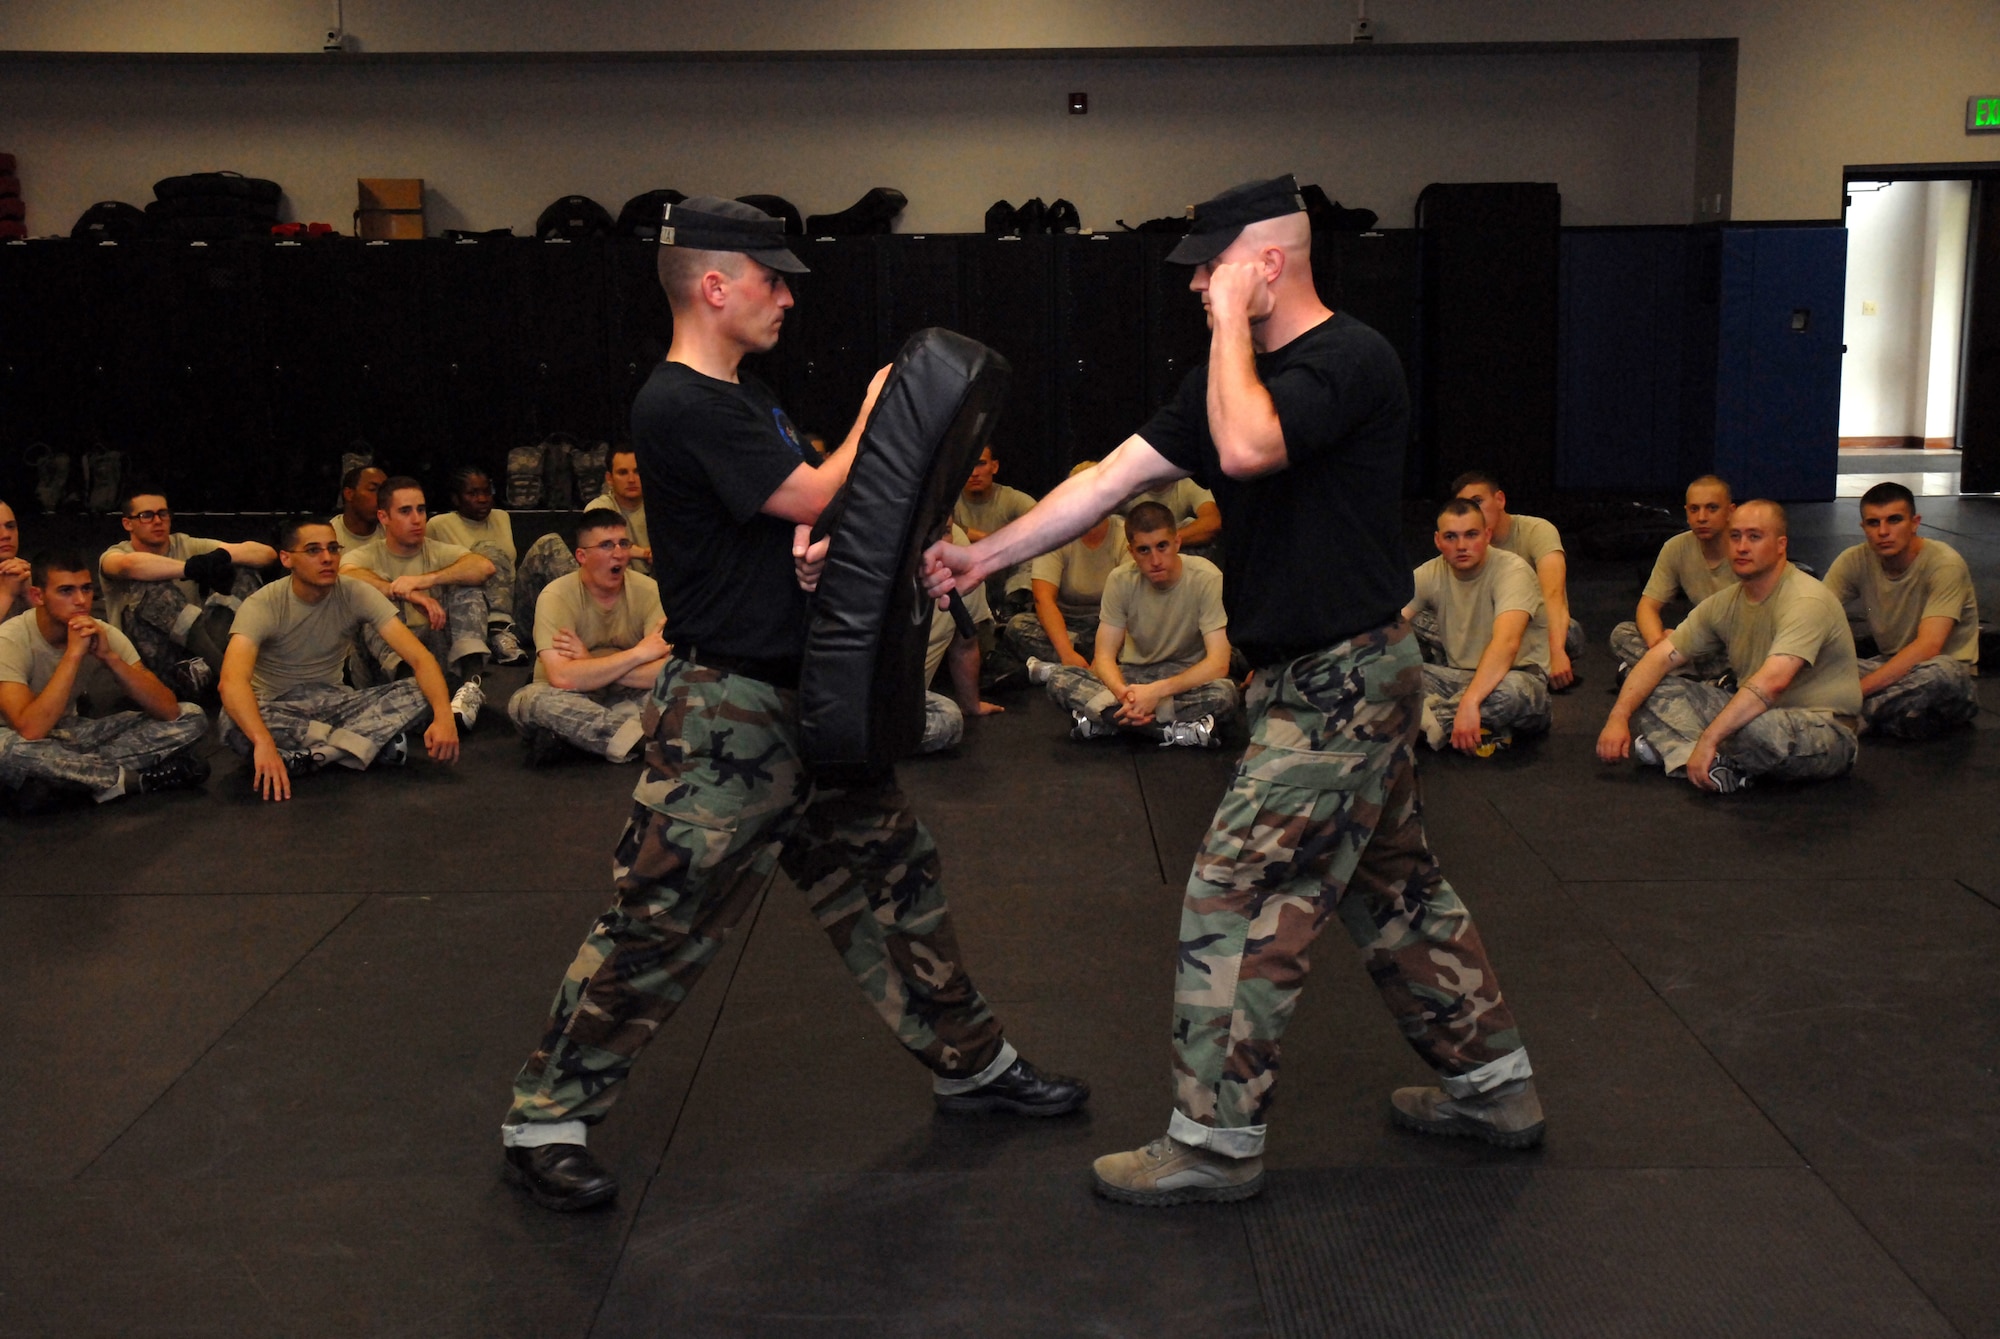 Fly-Away Security Team (FAST) instructors, Technical Sergeants David Balista and George Dollenger, 421 Combat Training Squadron, instructs students in the proper strike technique during collapsable baton training at the U.S. Air Force Expeditionary Center, Joint Base McGuire-Dix-Lakehurst, N.J. on June 4, 2009. FAST members provide airfield assessment and aircraft security for Air Force Central Command  transient resources. (U.S. Air Force Photo/Tech. Sgt. Paul R. Evans)